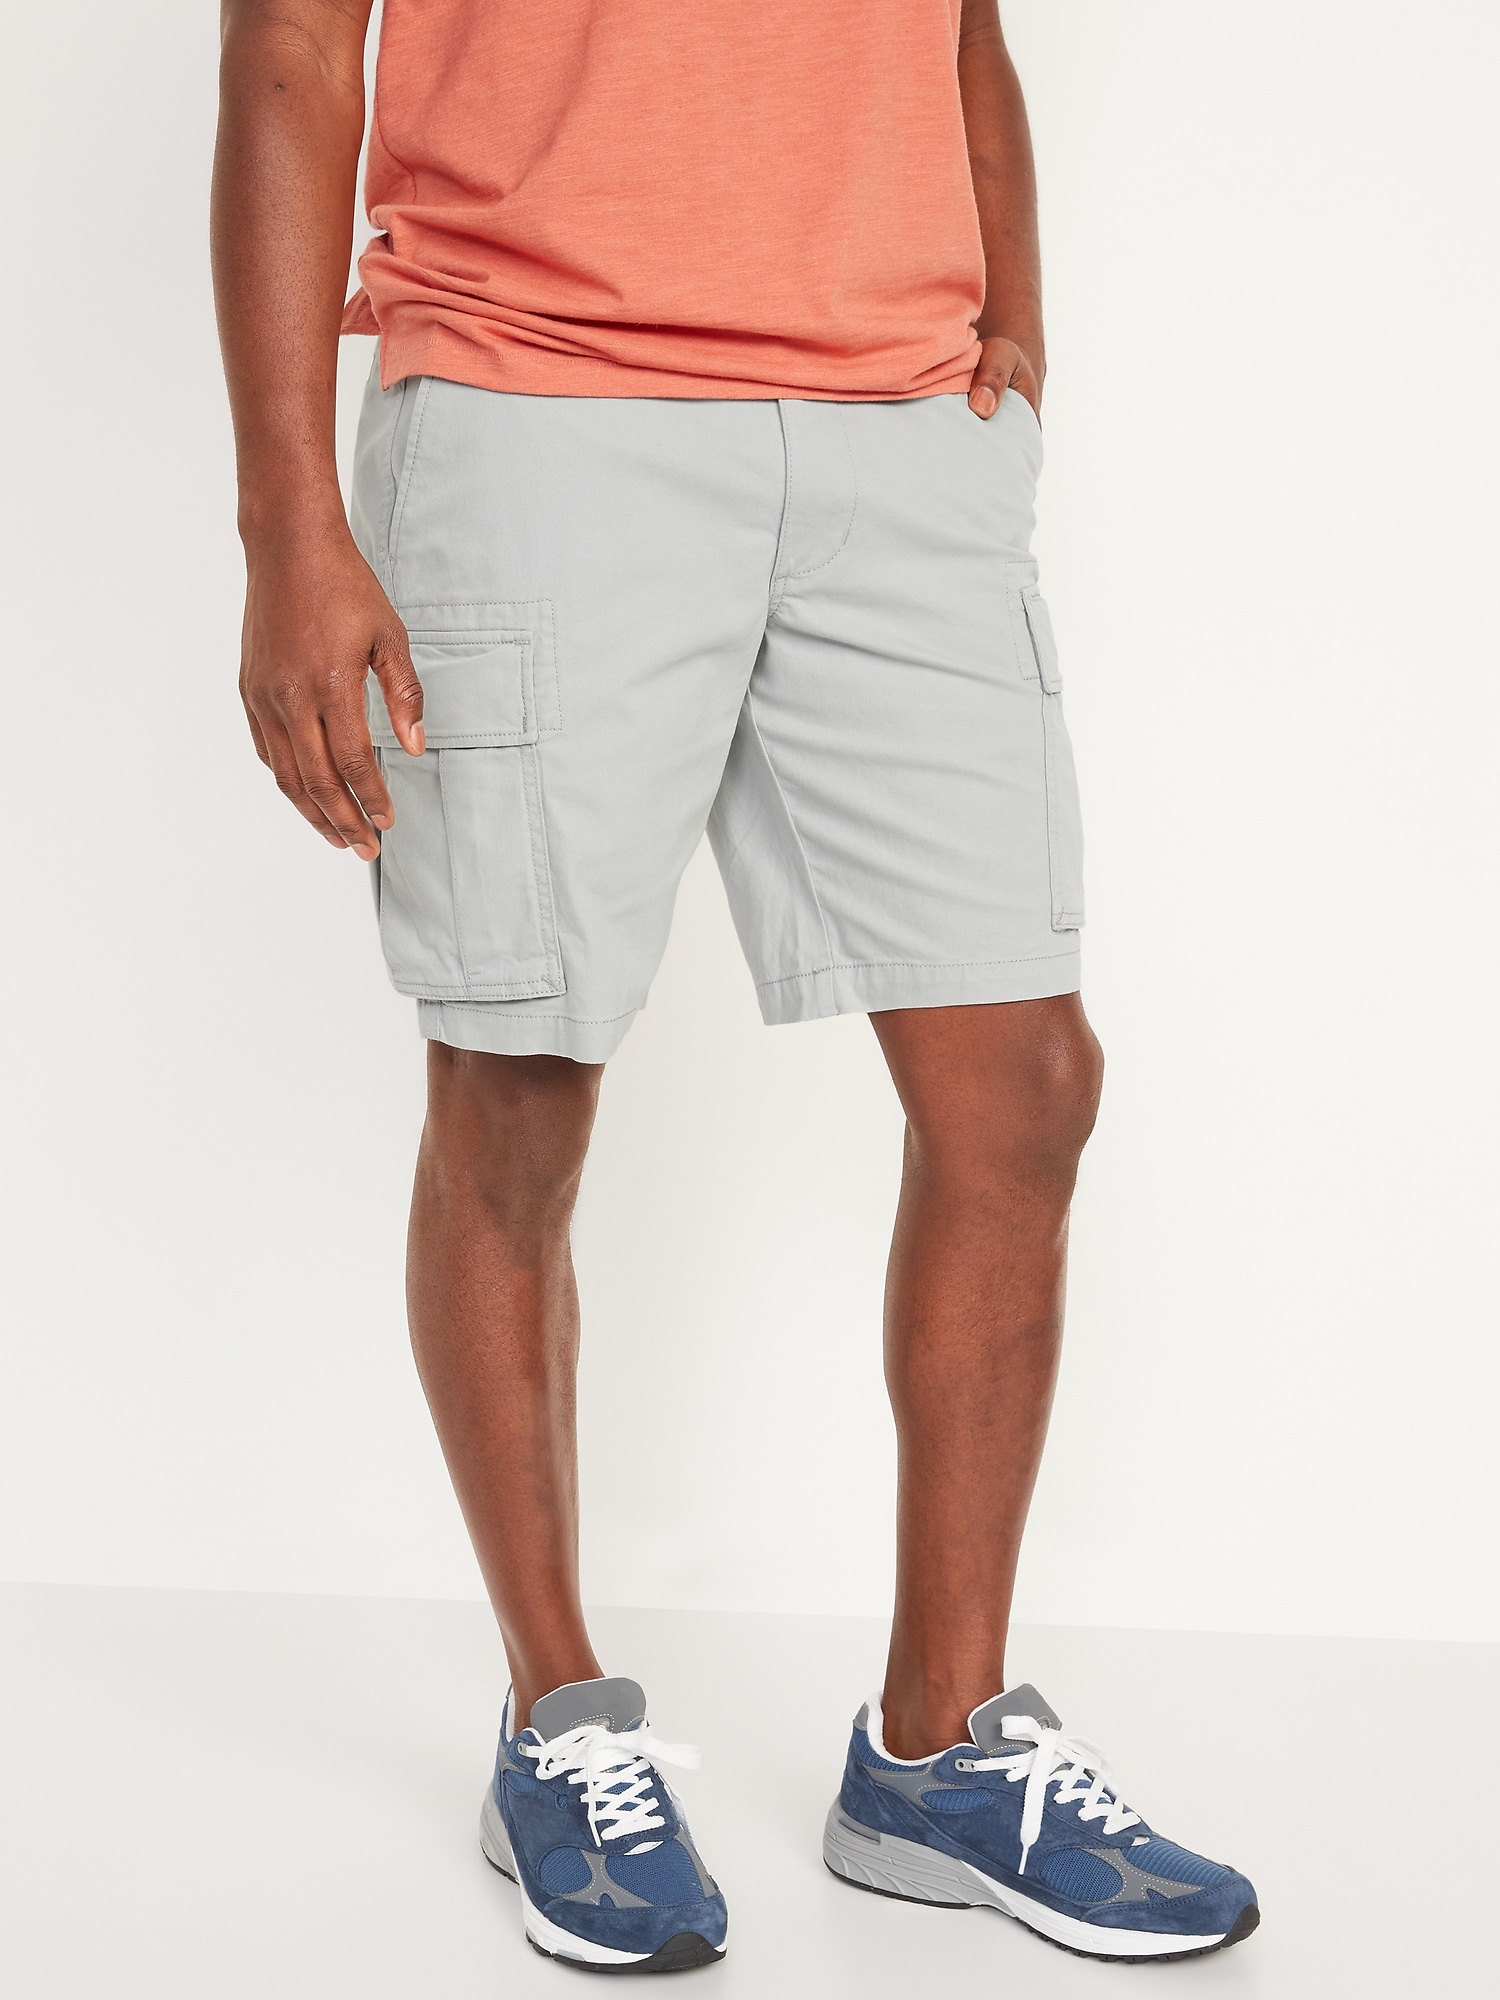 Mens Shorts - Buy Cotton Shorts for Men Online | Mufti